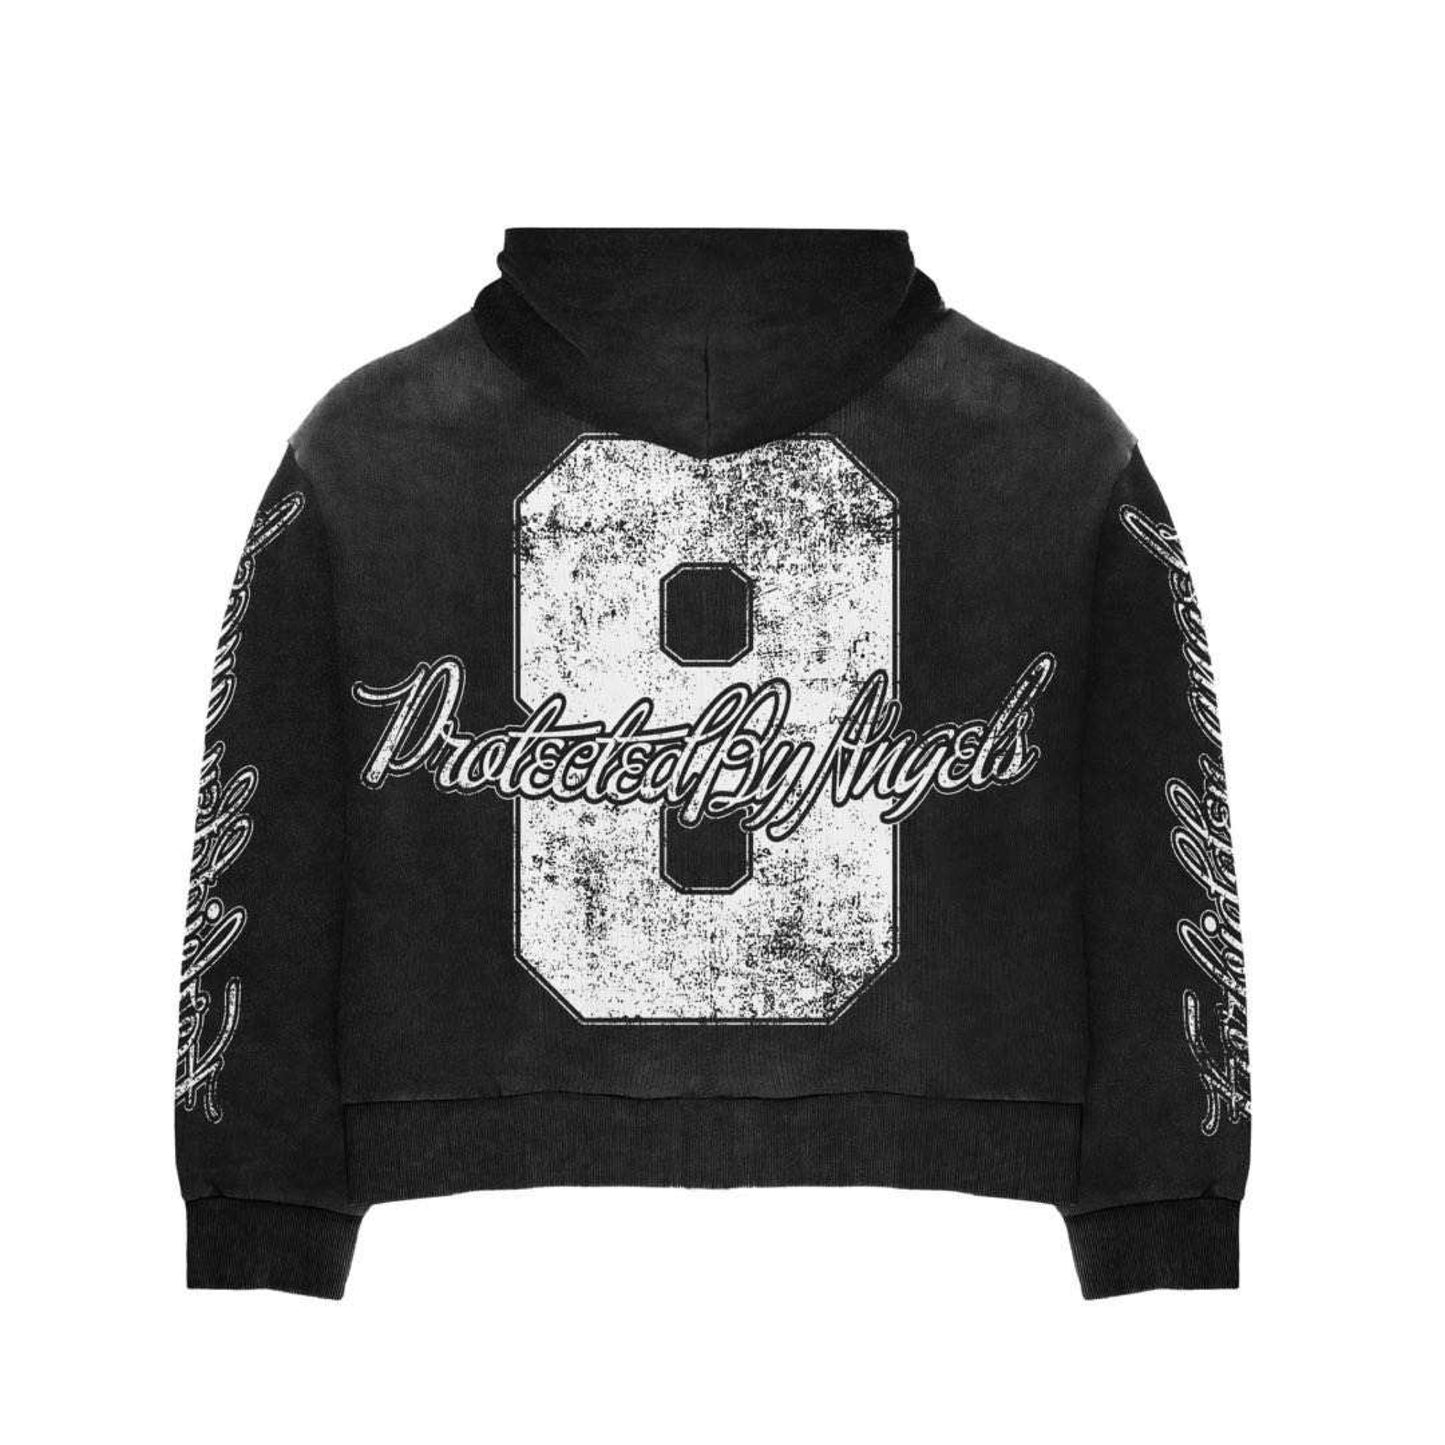 “PROTECTED BY ANGELS” SWEATSUIT